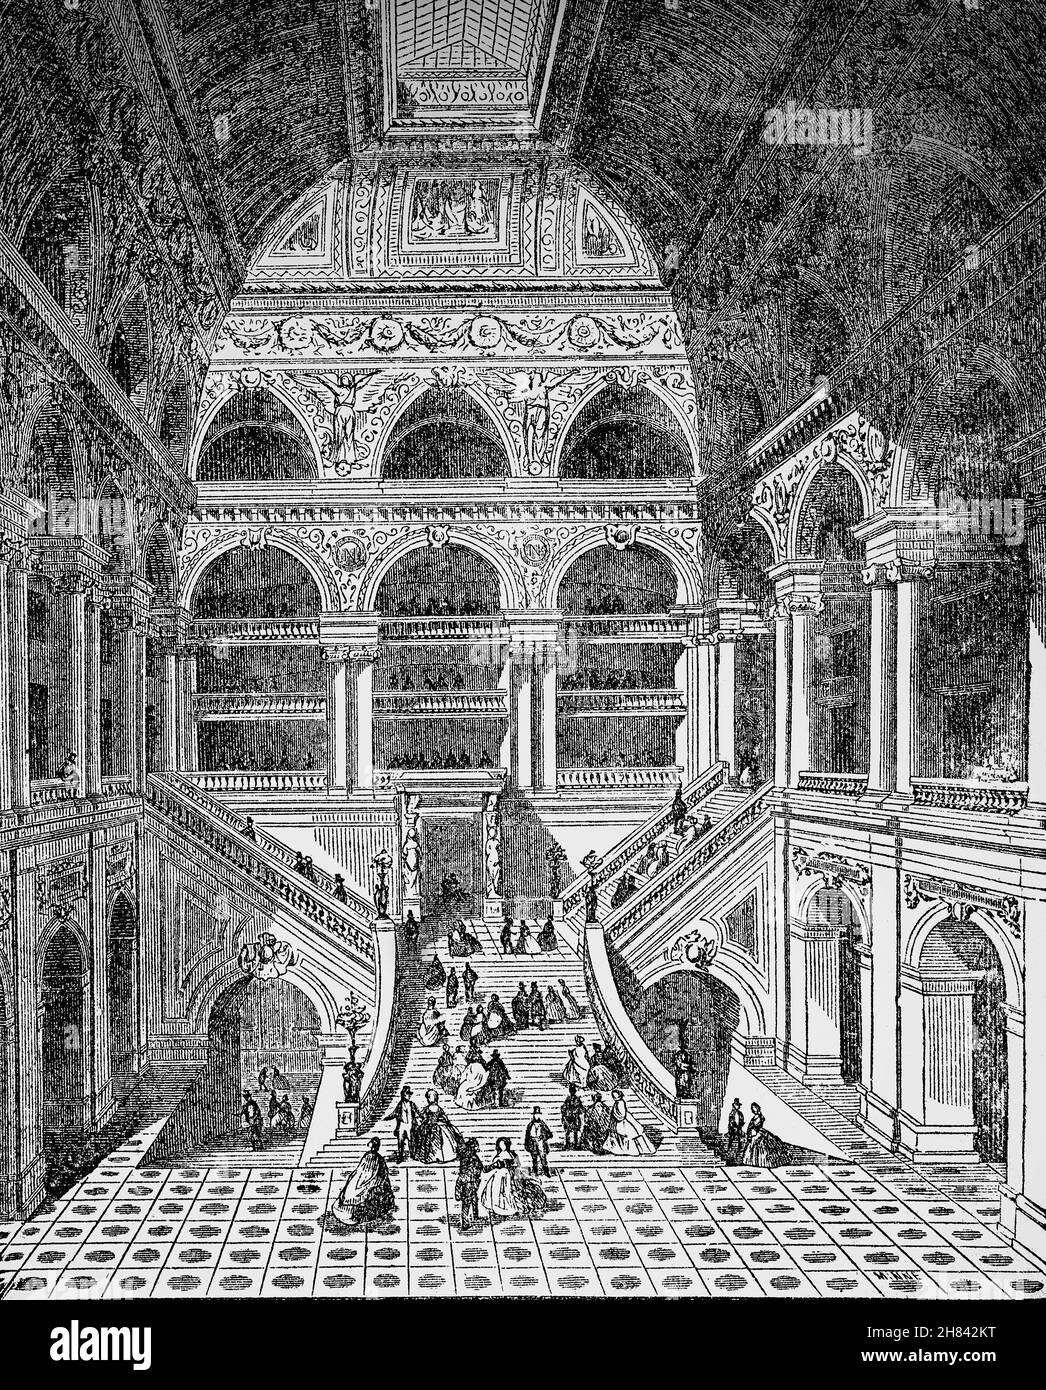 A late 19th Century illustration of the interior of the Palais Garnier aka Opéra Garnier, the opera house at the Place de l'Opéra in the 9th arrondissement of Paris, France. It was built for the Paris Opera from 1861 to 1875 at the behest of Emperor Napoleon III by the the architect Charles Garnier. Stock Photo